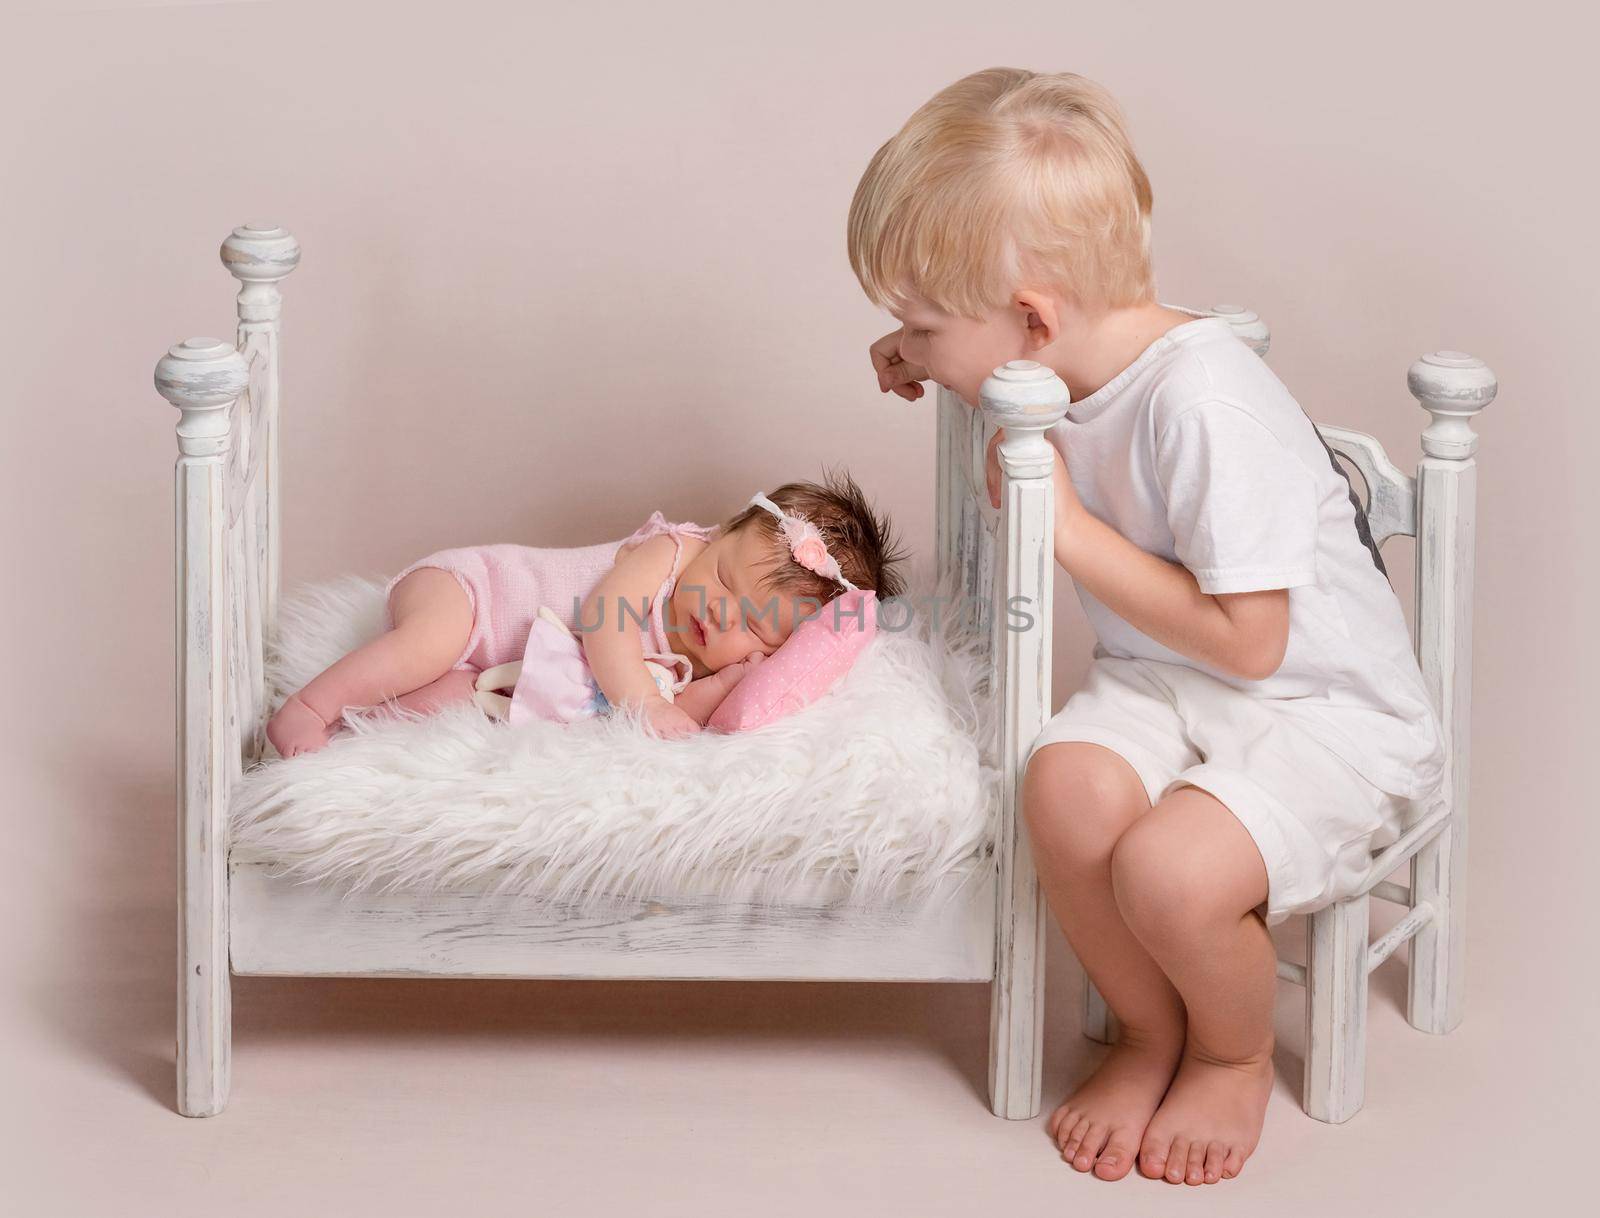 Little blond boy looking on baby in pink knitted suit sweetly sleeping in tiny bed with soft white blanket